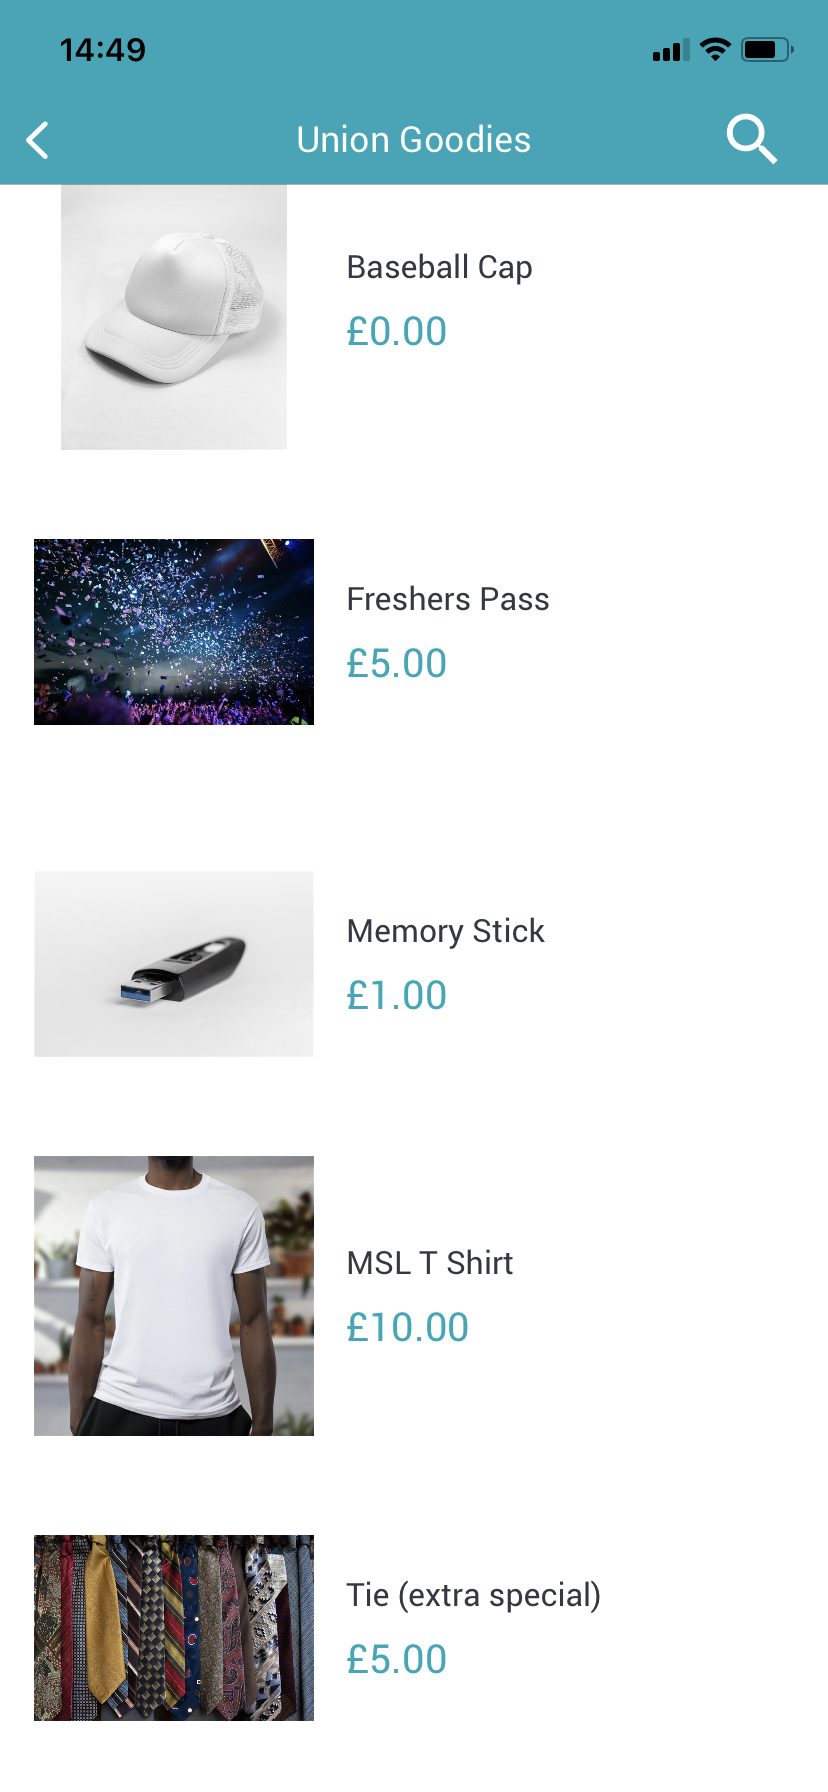 Image from the StudentLink app showing the app shop and items for sale in app